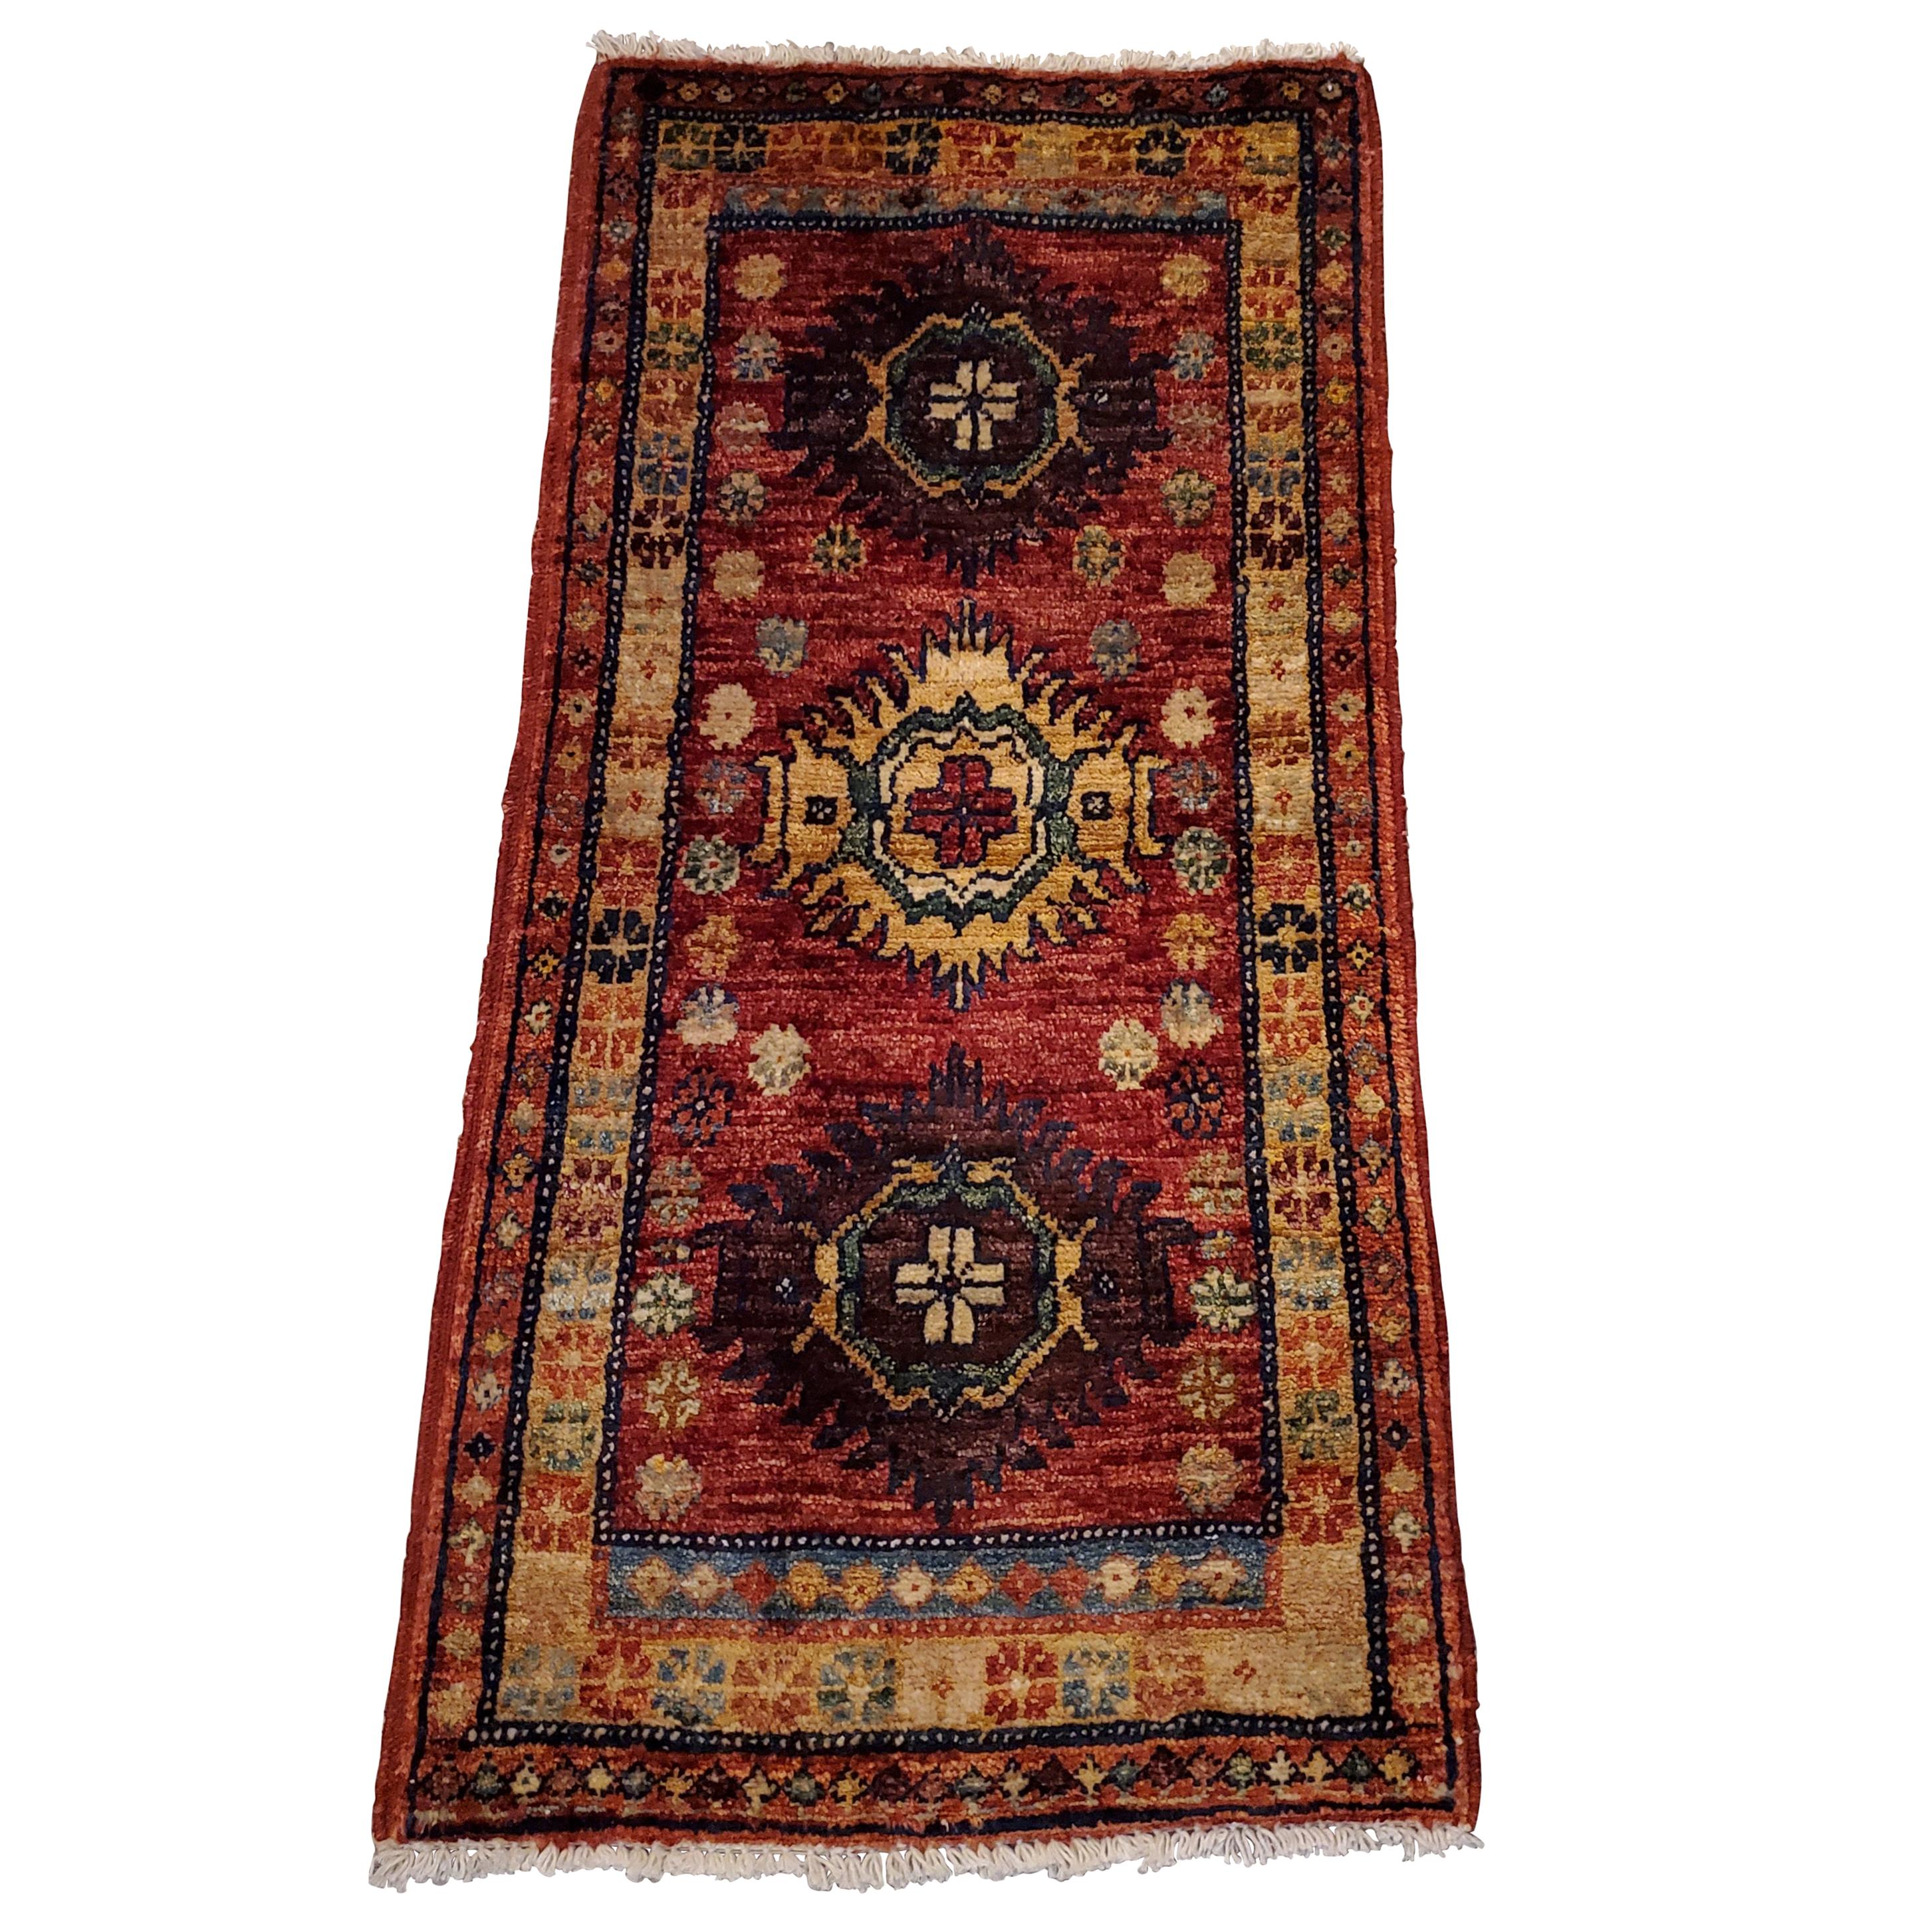 Medium Size Asian Area Rug, Colorful / 217 For Sale